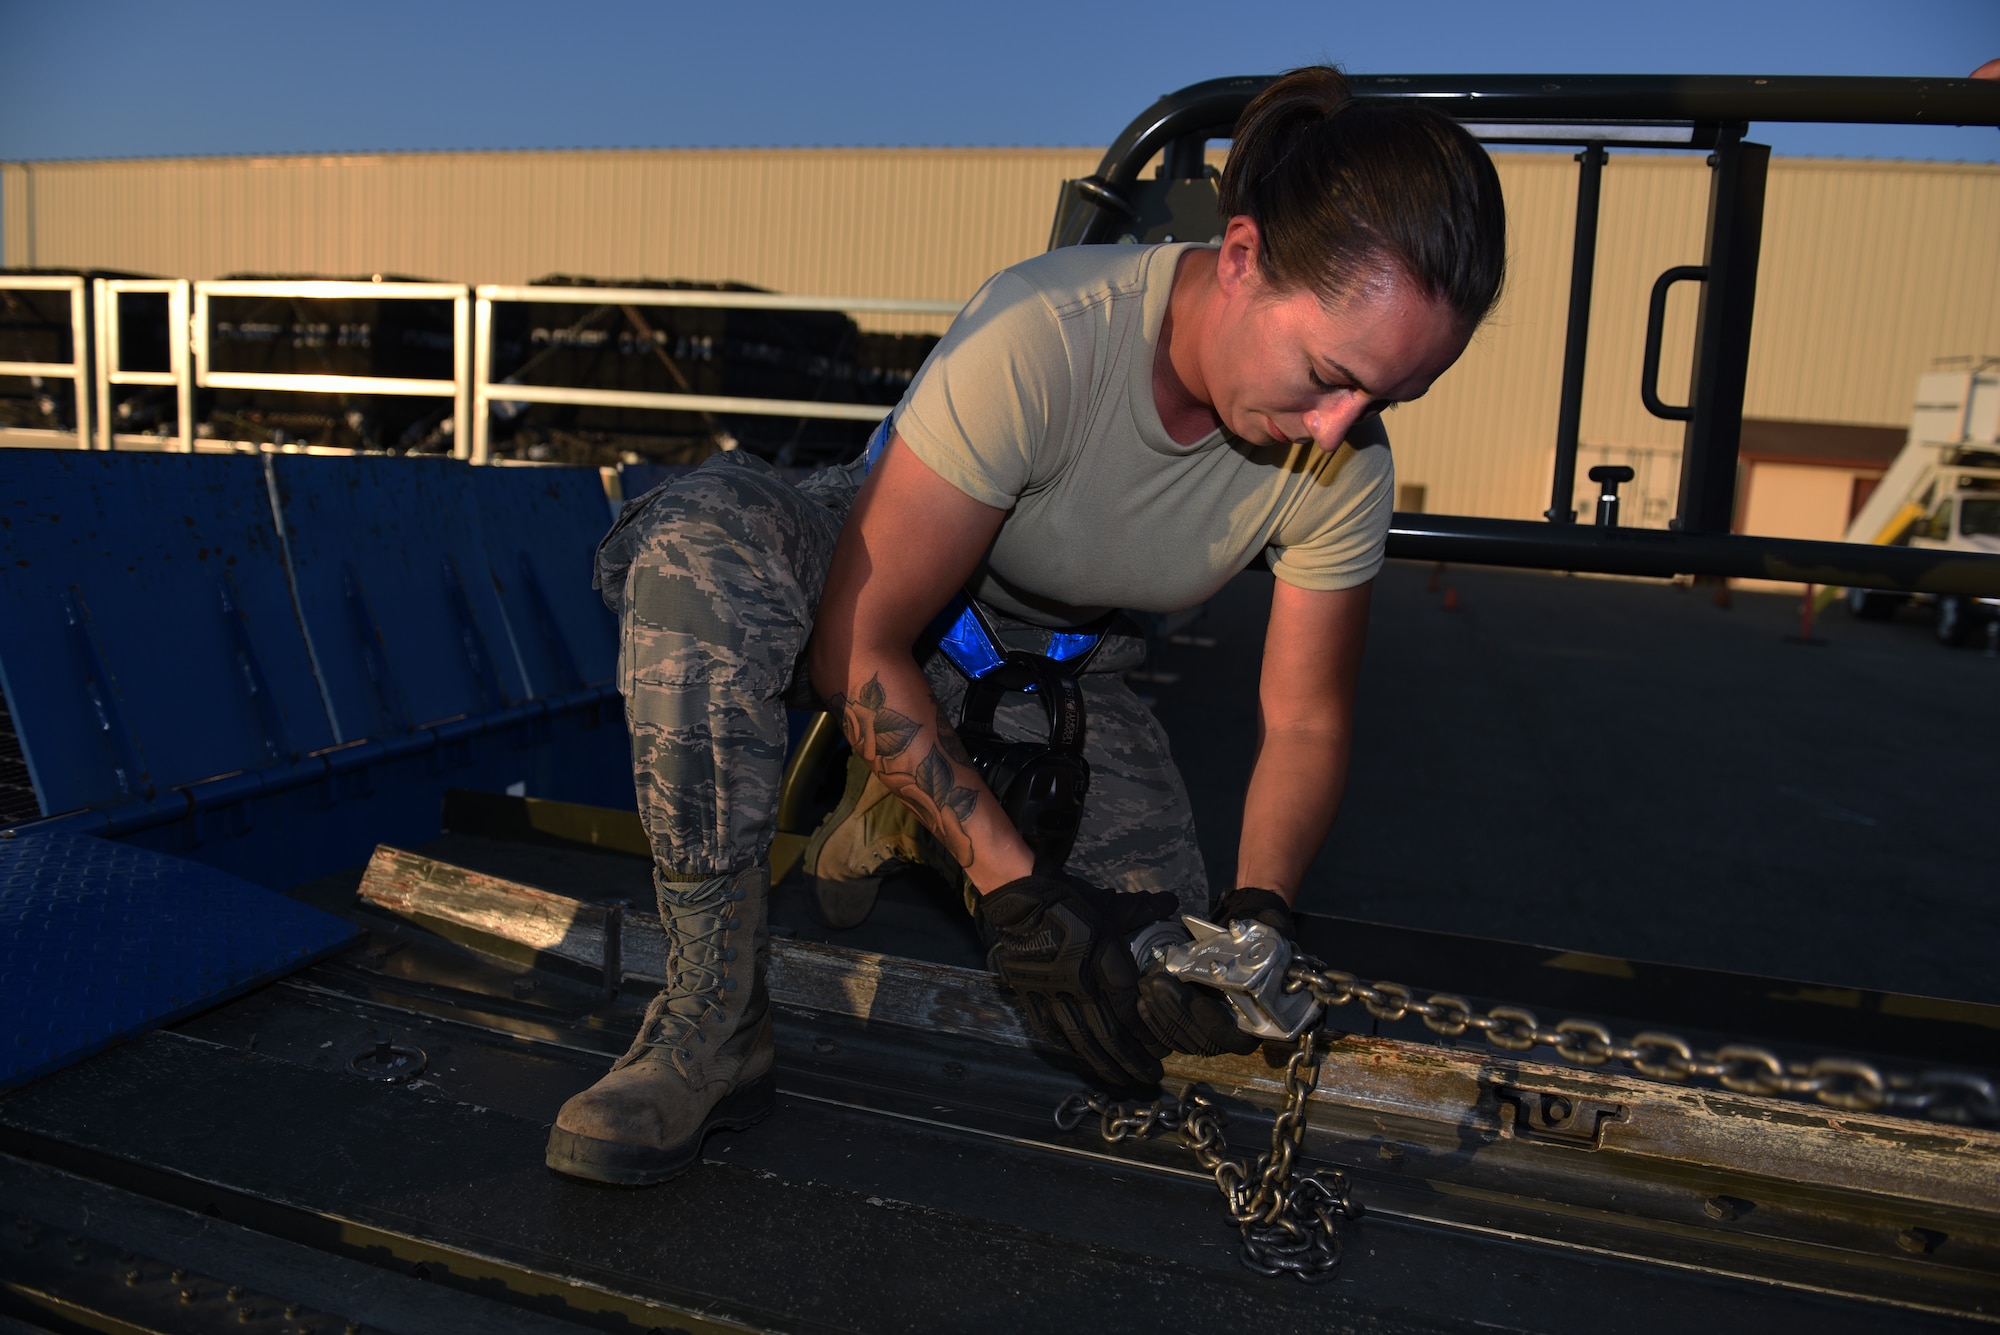 U.S. Air Force Airman Naomi Hill, 60th Aerial Port Squadron ramp operations journeyman, fastens cargo for transport on a C-5M Super Galaxy Sept. 13, 2019, at Travis Air Force Base, California. MG19 is Air Mobility Command’s largest enterprise-wide training event with more than 4,000 joint and international personnel integrated to hone teamwork and improve longstanding partnerships. MG19 also validates the Air Force’s readiness to conduct mobility operations in contested, degraded and operationally-limited environments. (U.S. Air Force photo by Airman 1st Class Cameron Otte)